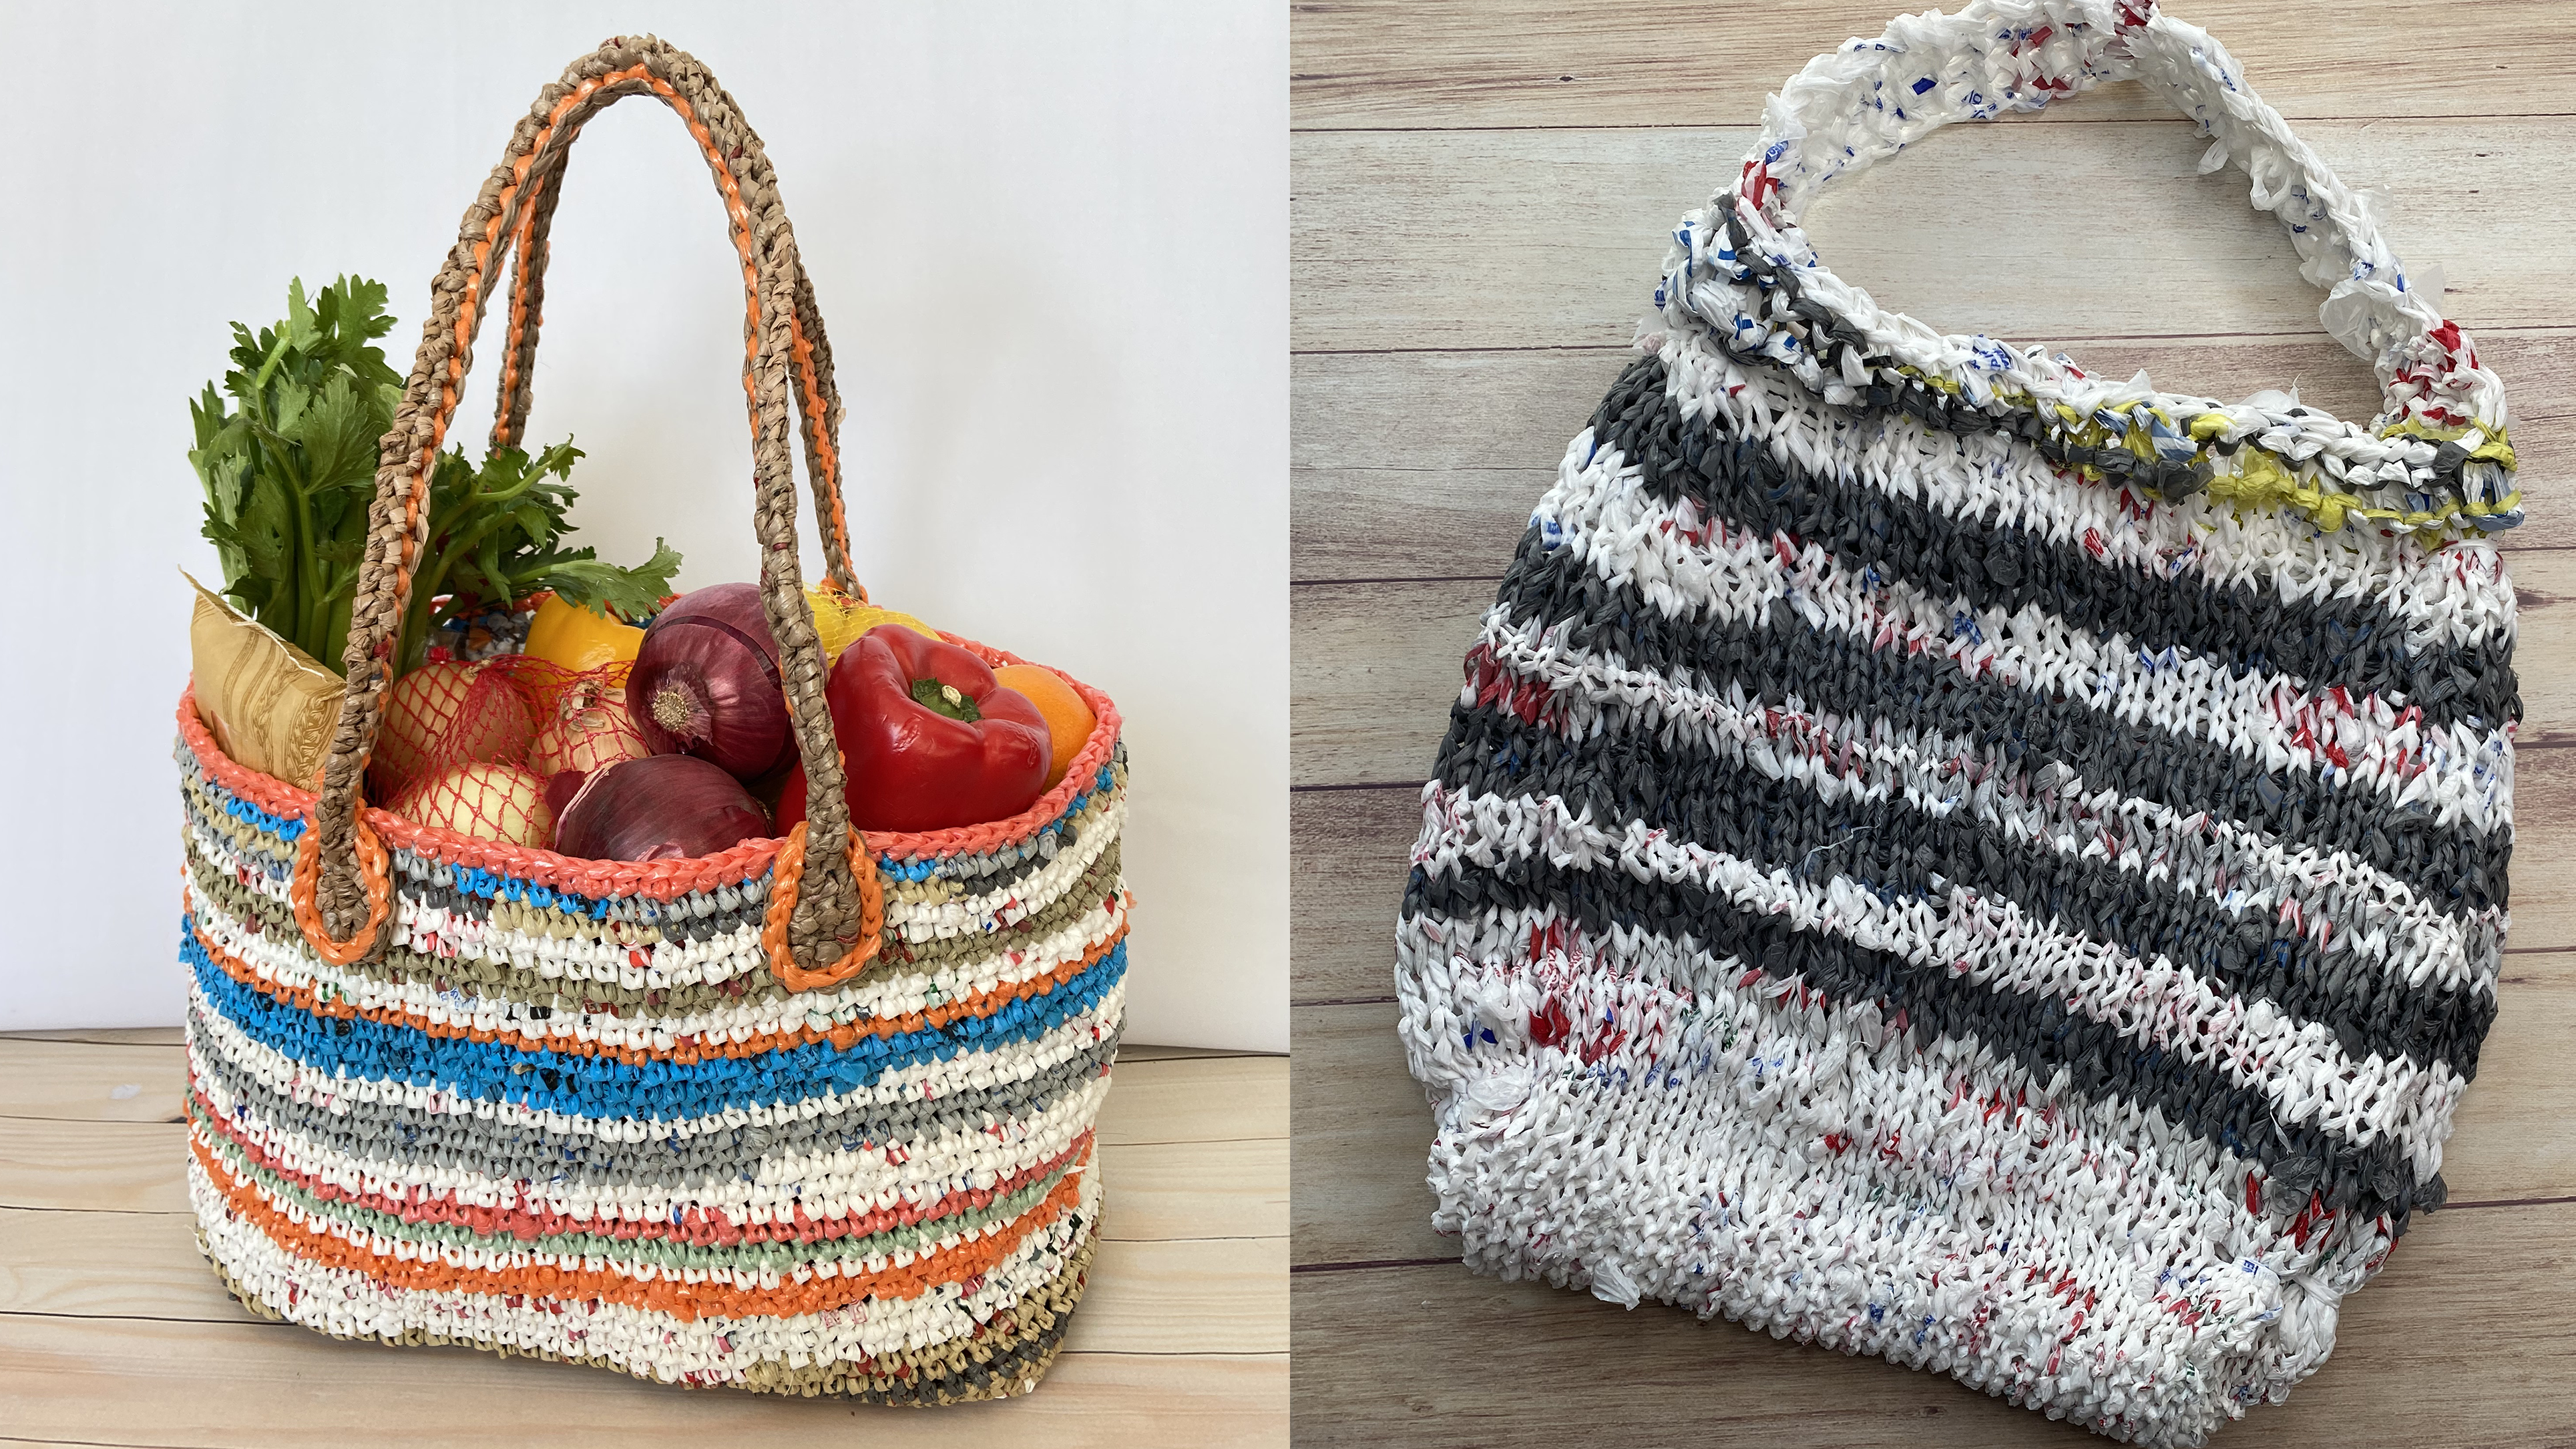 DIY Basket Bag from Plastic | Upcycling Crafts for Eco-Friendly Handmade  Bags